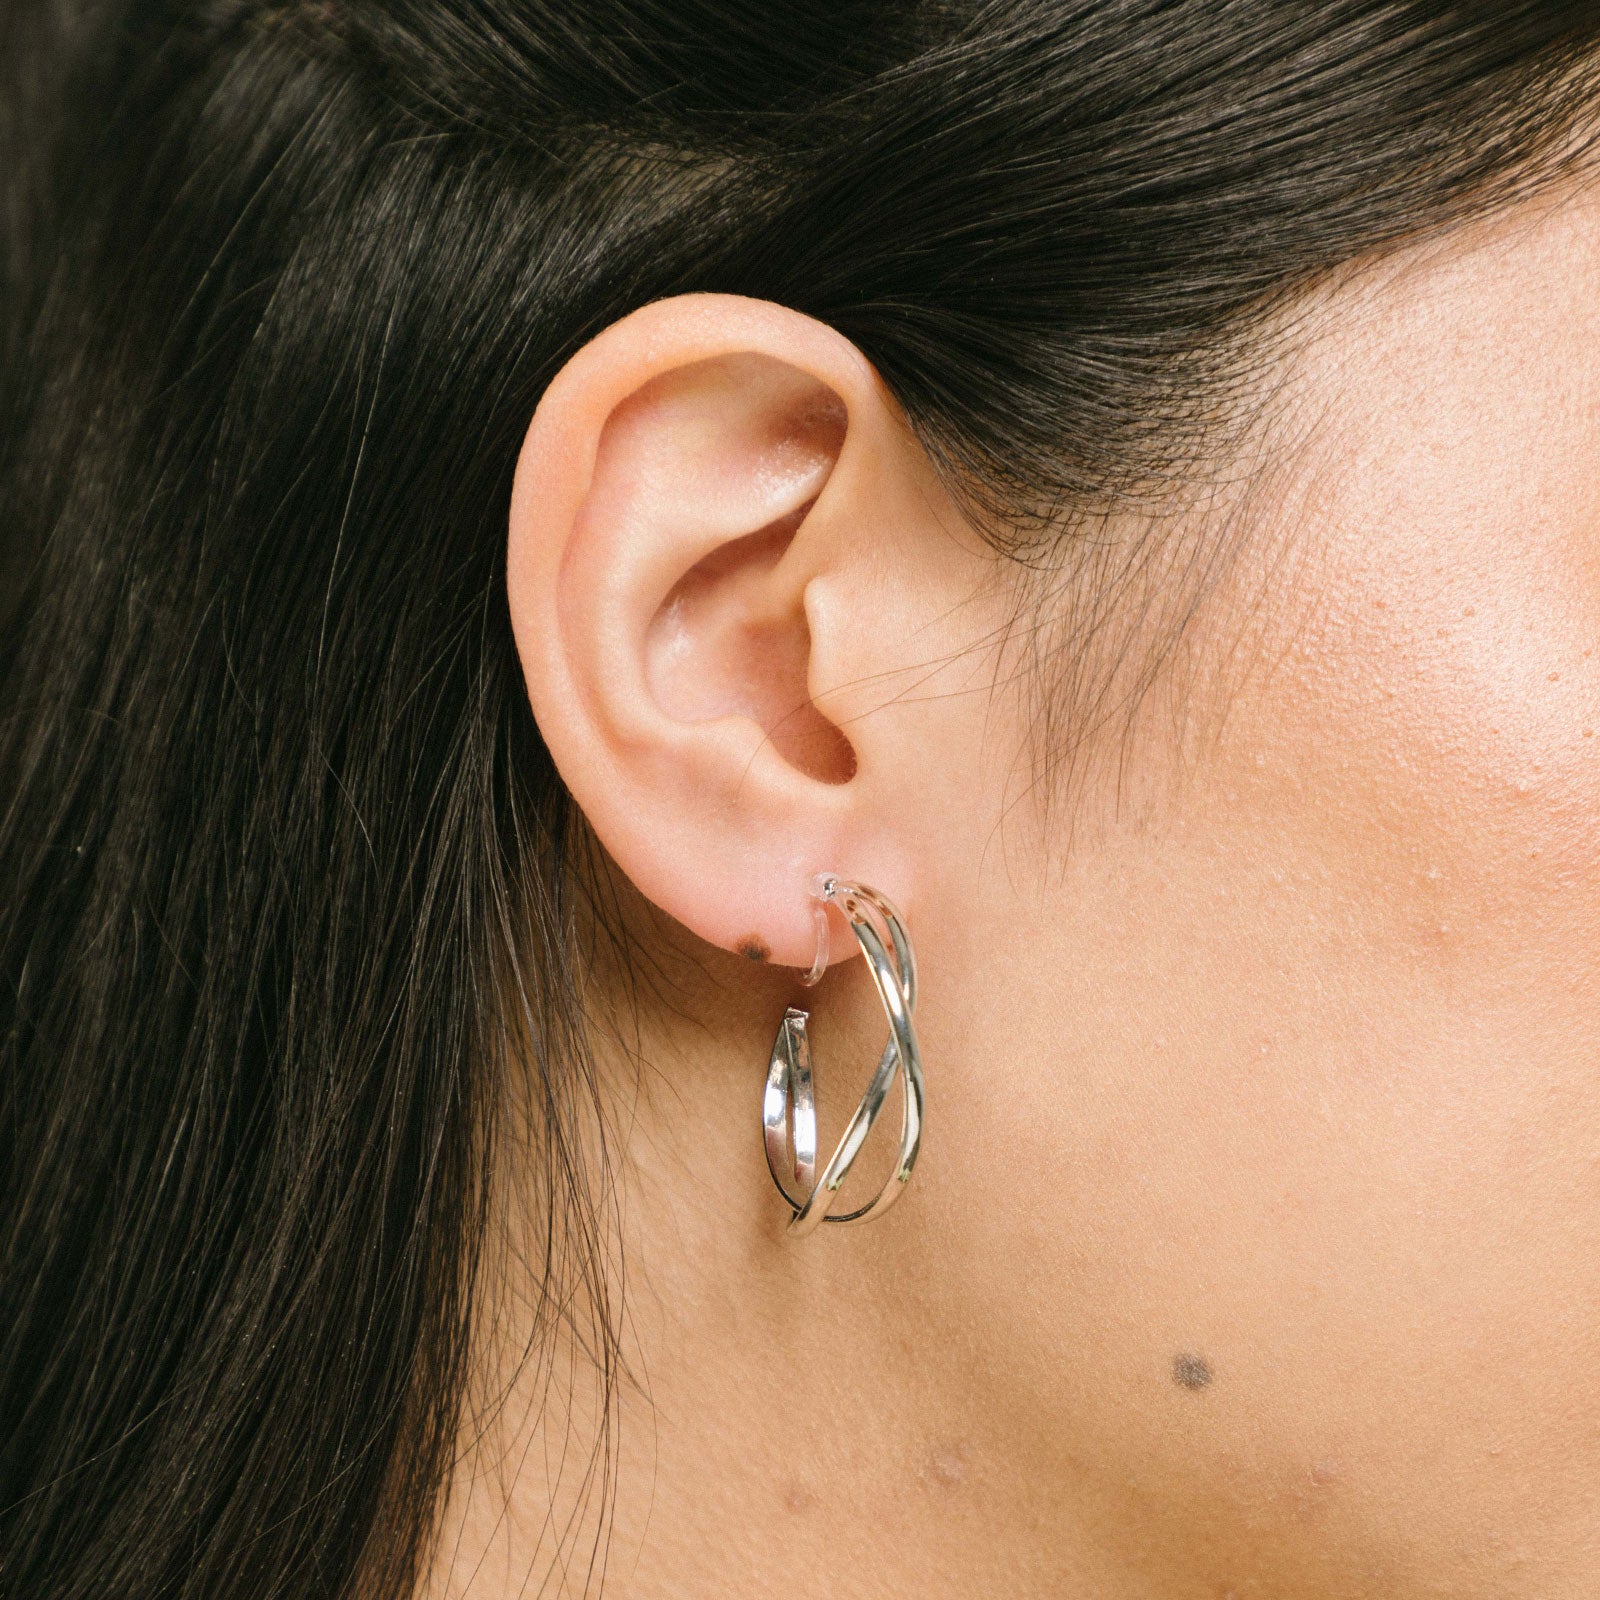 A model wearing the Silver Vienna Hoop Clip-On Earrings are crafted of Silver Tone Metal Alloy and feature a resin clip-on closure. These earrings are suited for all ear types, providing a medium-secure hold and an 8-12 hour average comfortable wear duration. Adjustment is not possible for this item; it is sold as a single pair in gold and silver.